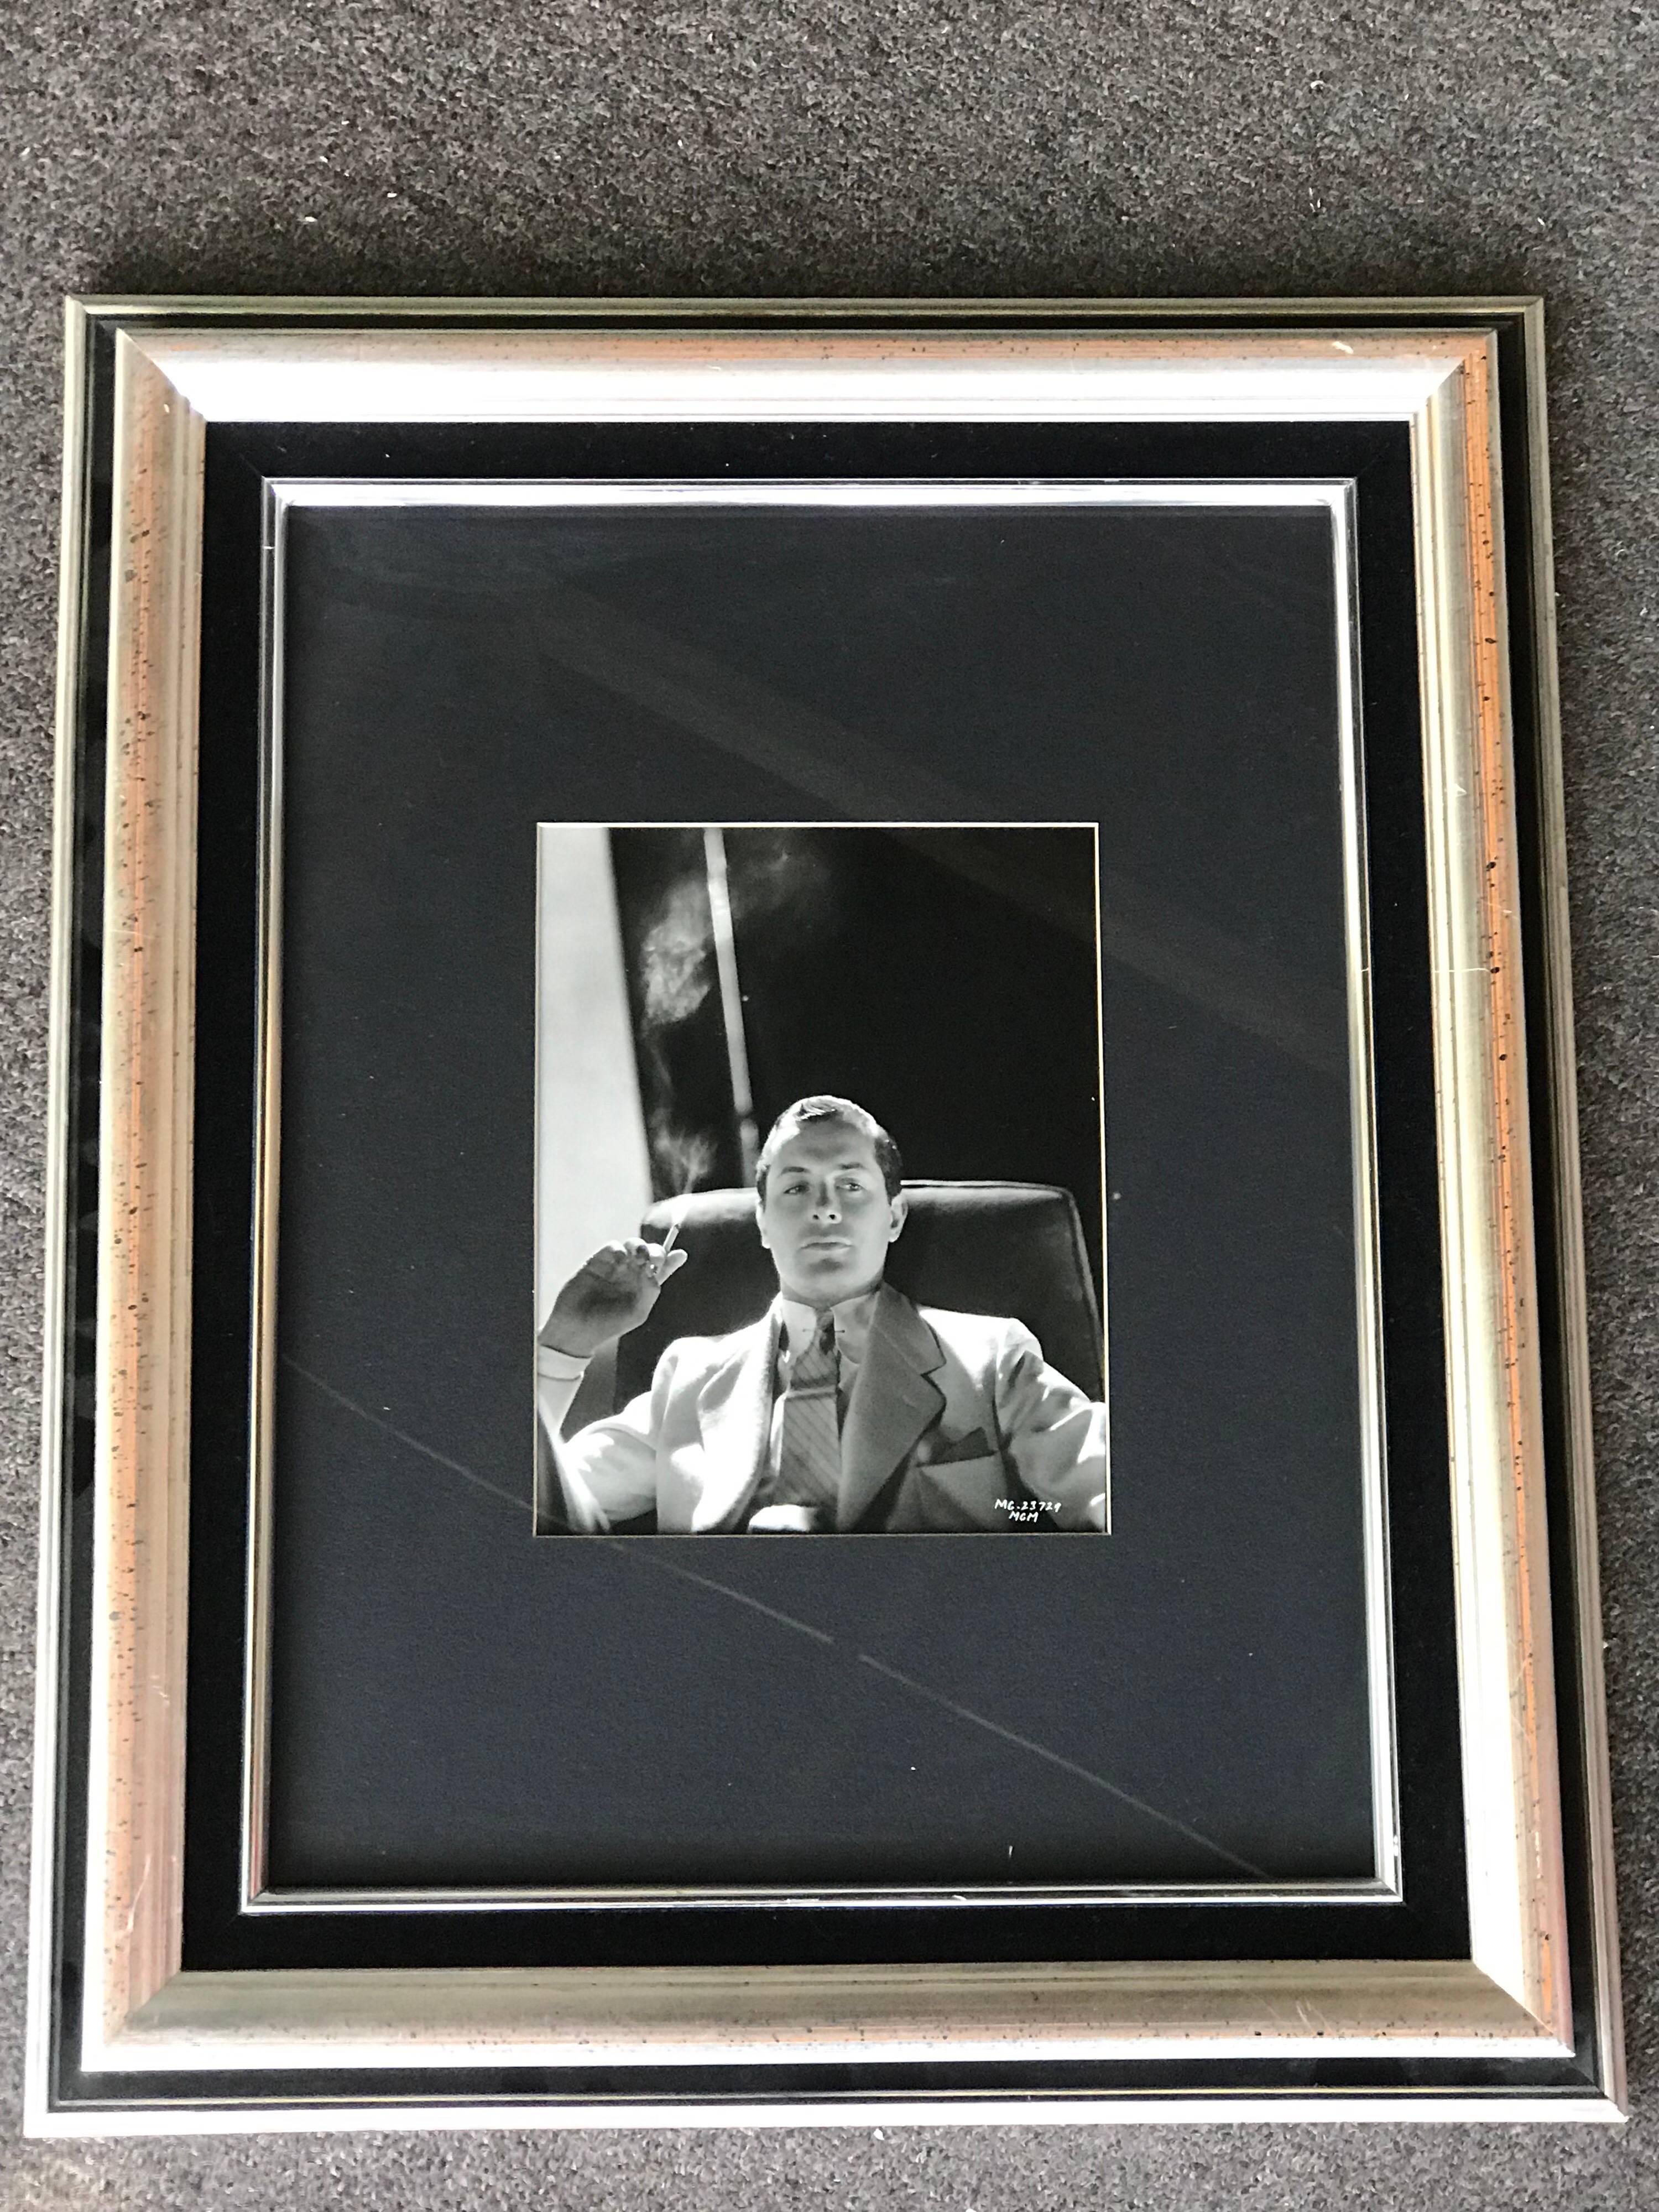 A beautiful old Hollywood glamour portrait of the very handsome actor, Robert Montgomery. This photograph was printed decades ago from the original negative by famed celebrity photographer, Clarence Sinclair Bull. The photo is unsigned with